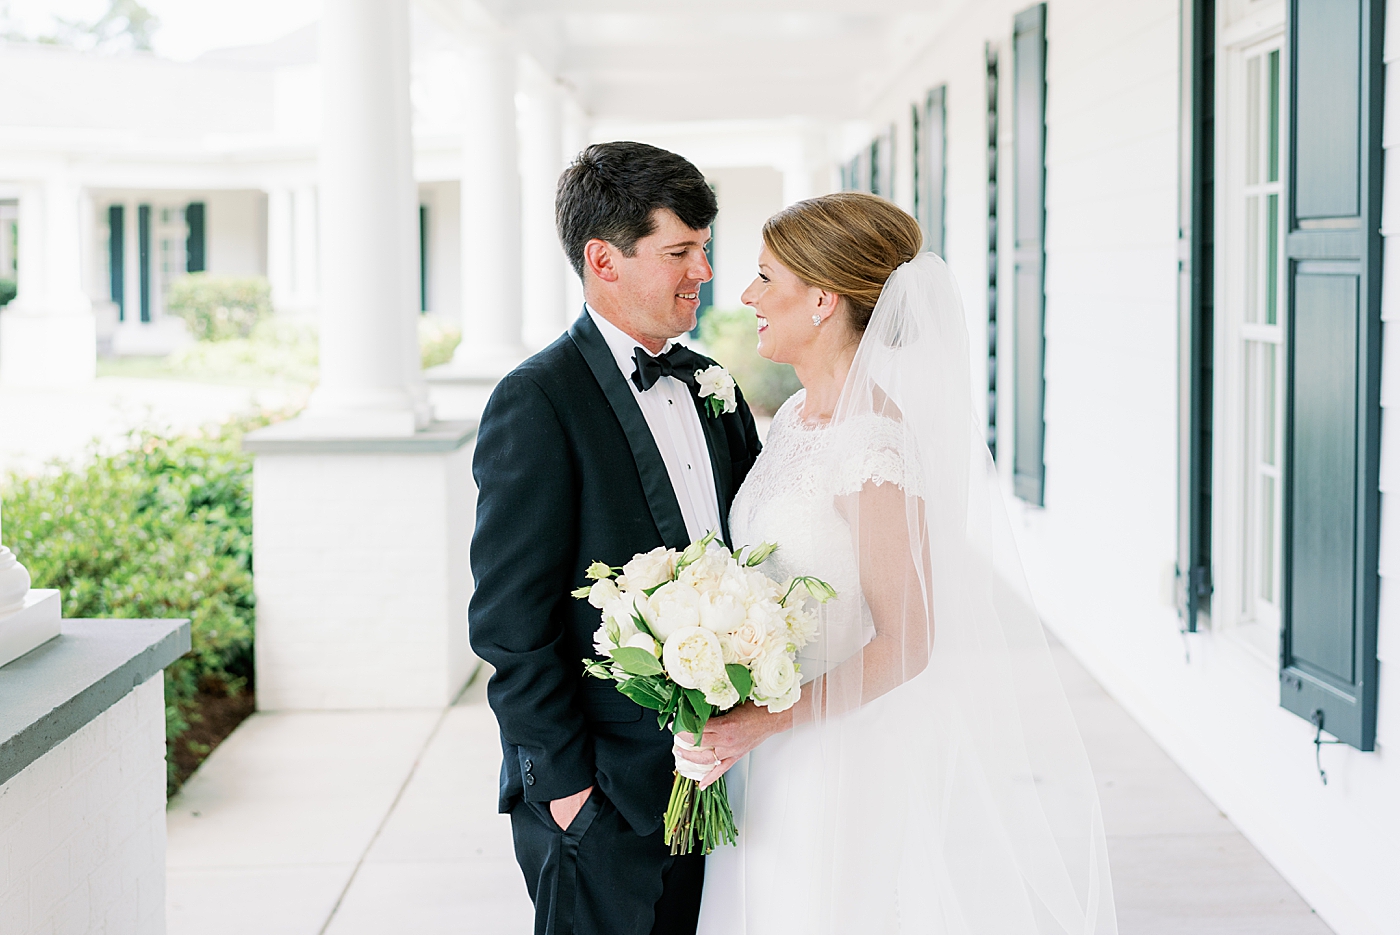 Bride and groom portraits during their Simple Southern Country Club Wedding | Image by Annie Laura Photo